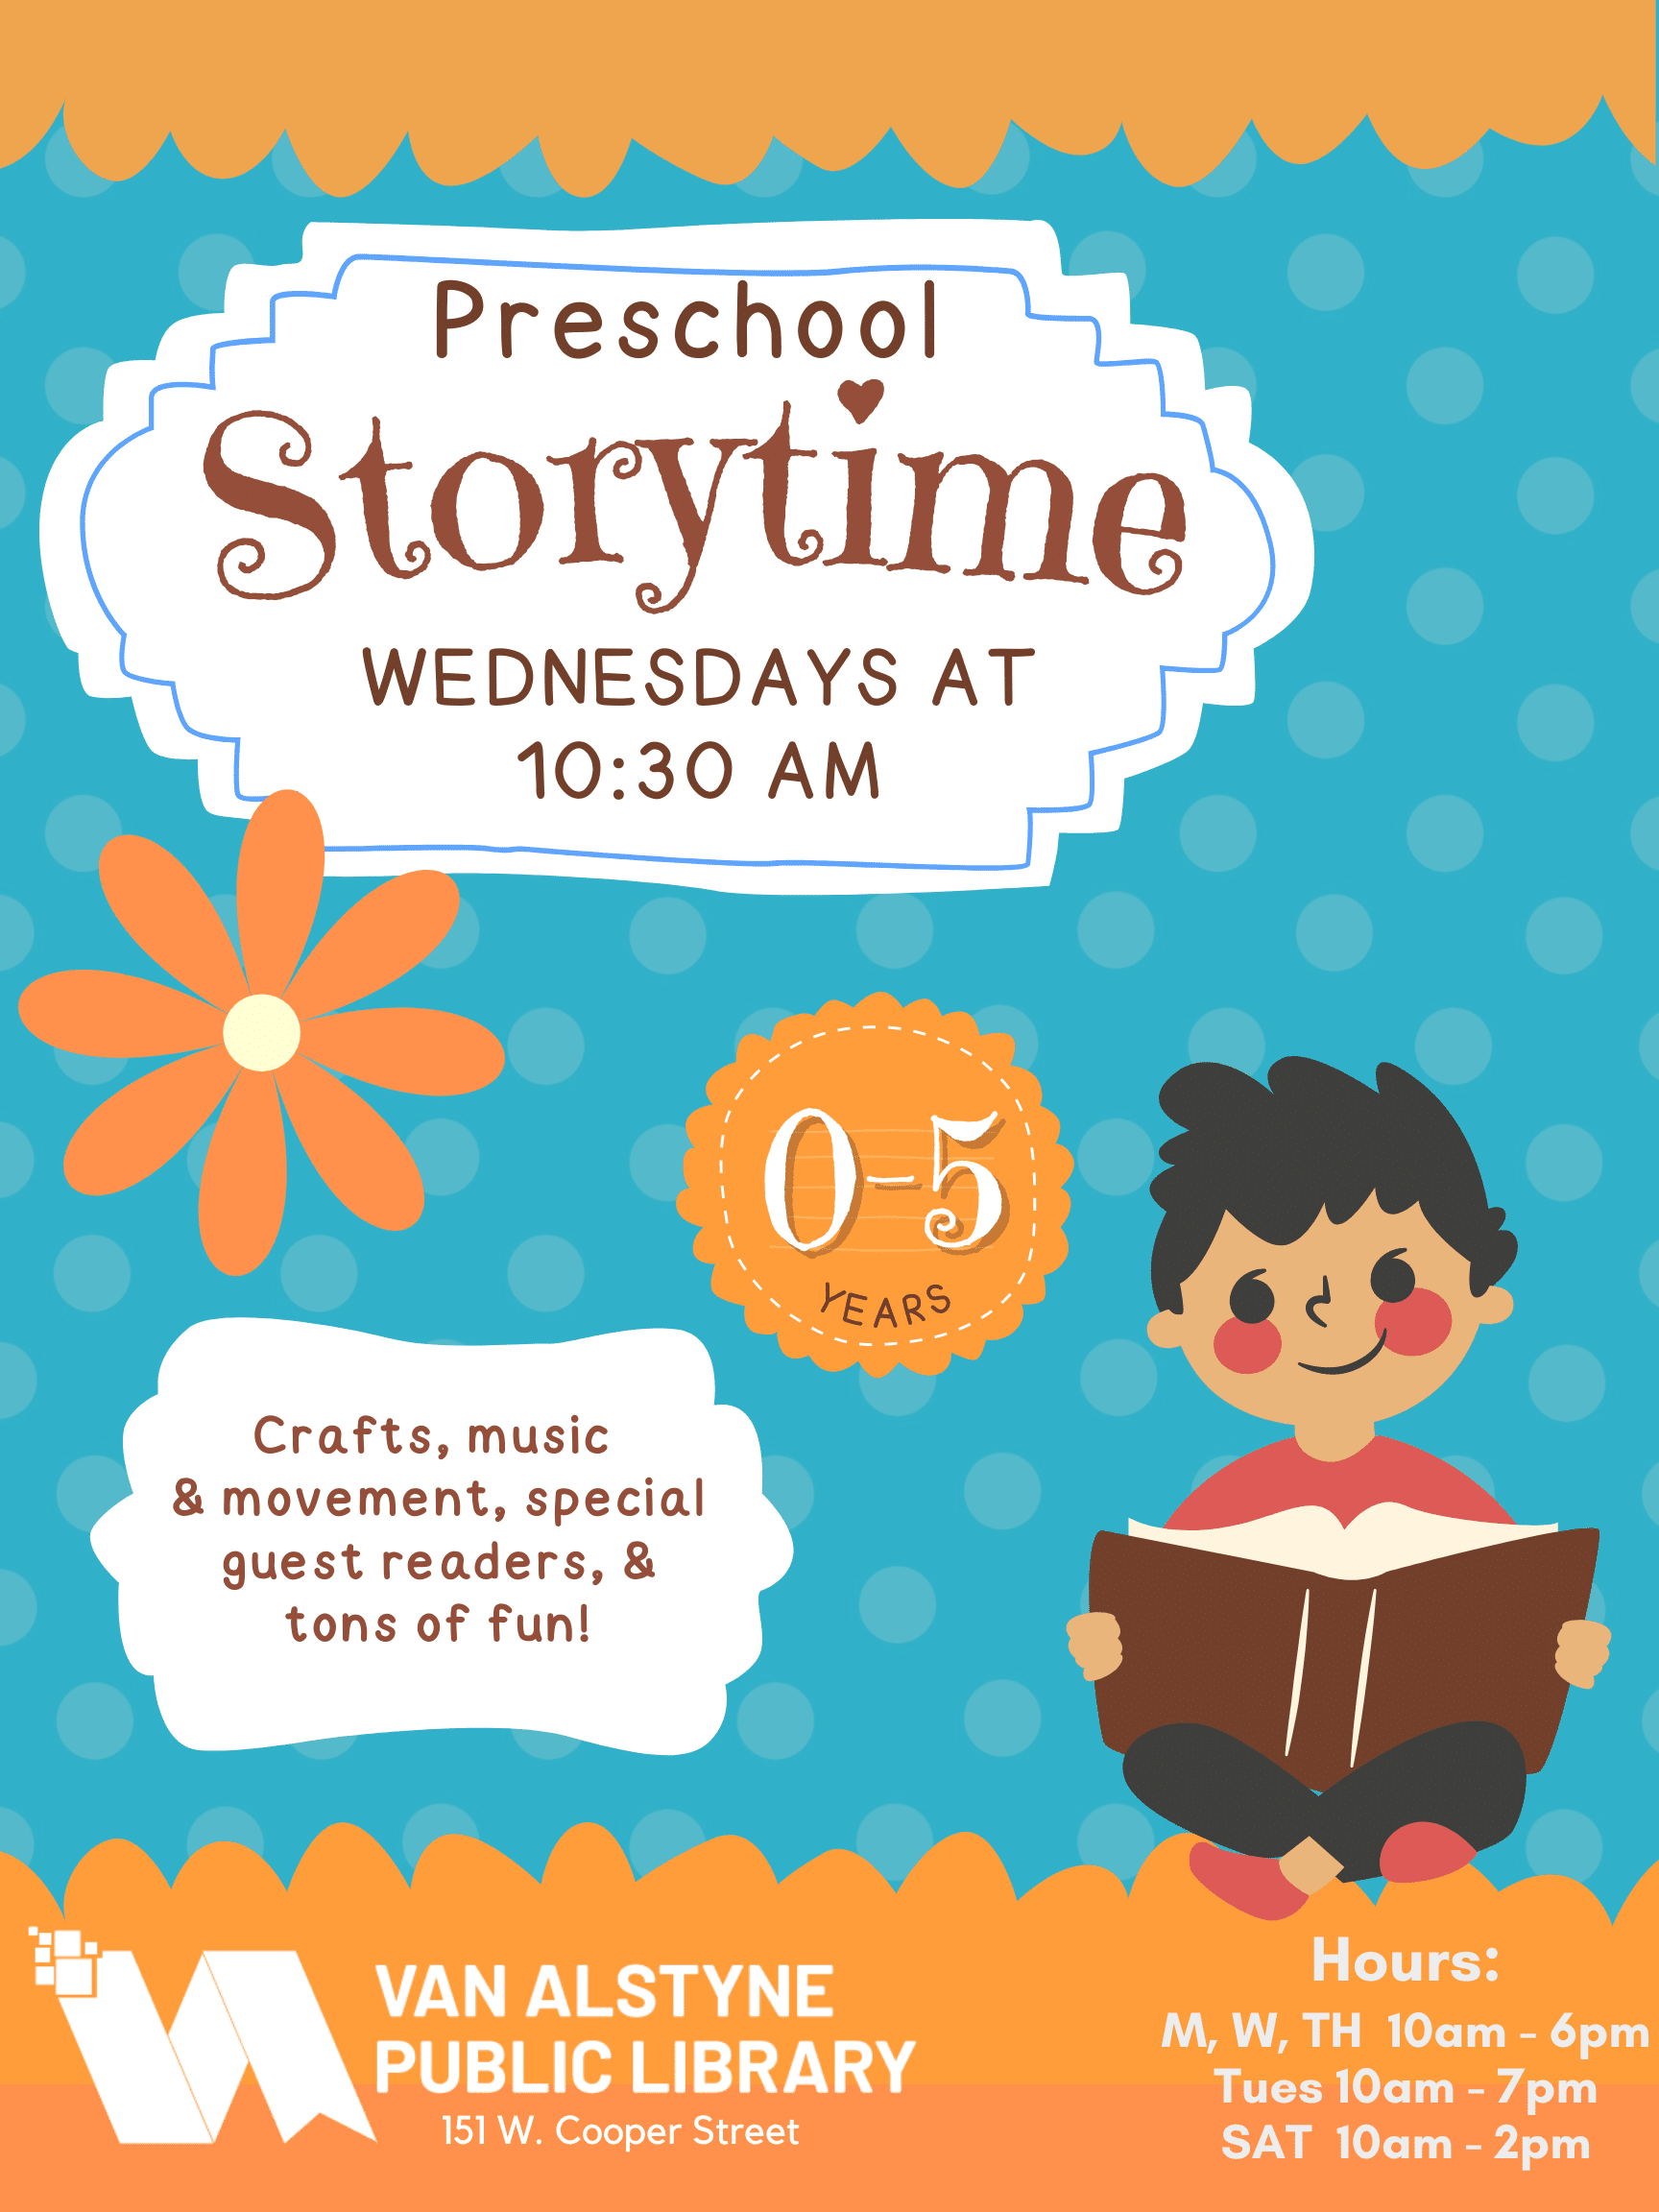 Join us for Story Time at the Van Alstyne Public Library Wednesdays at 10:30AM